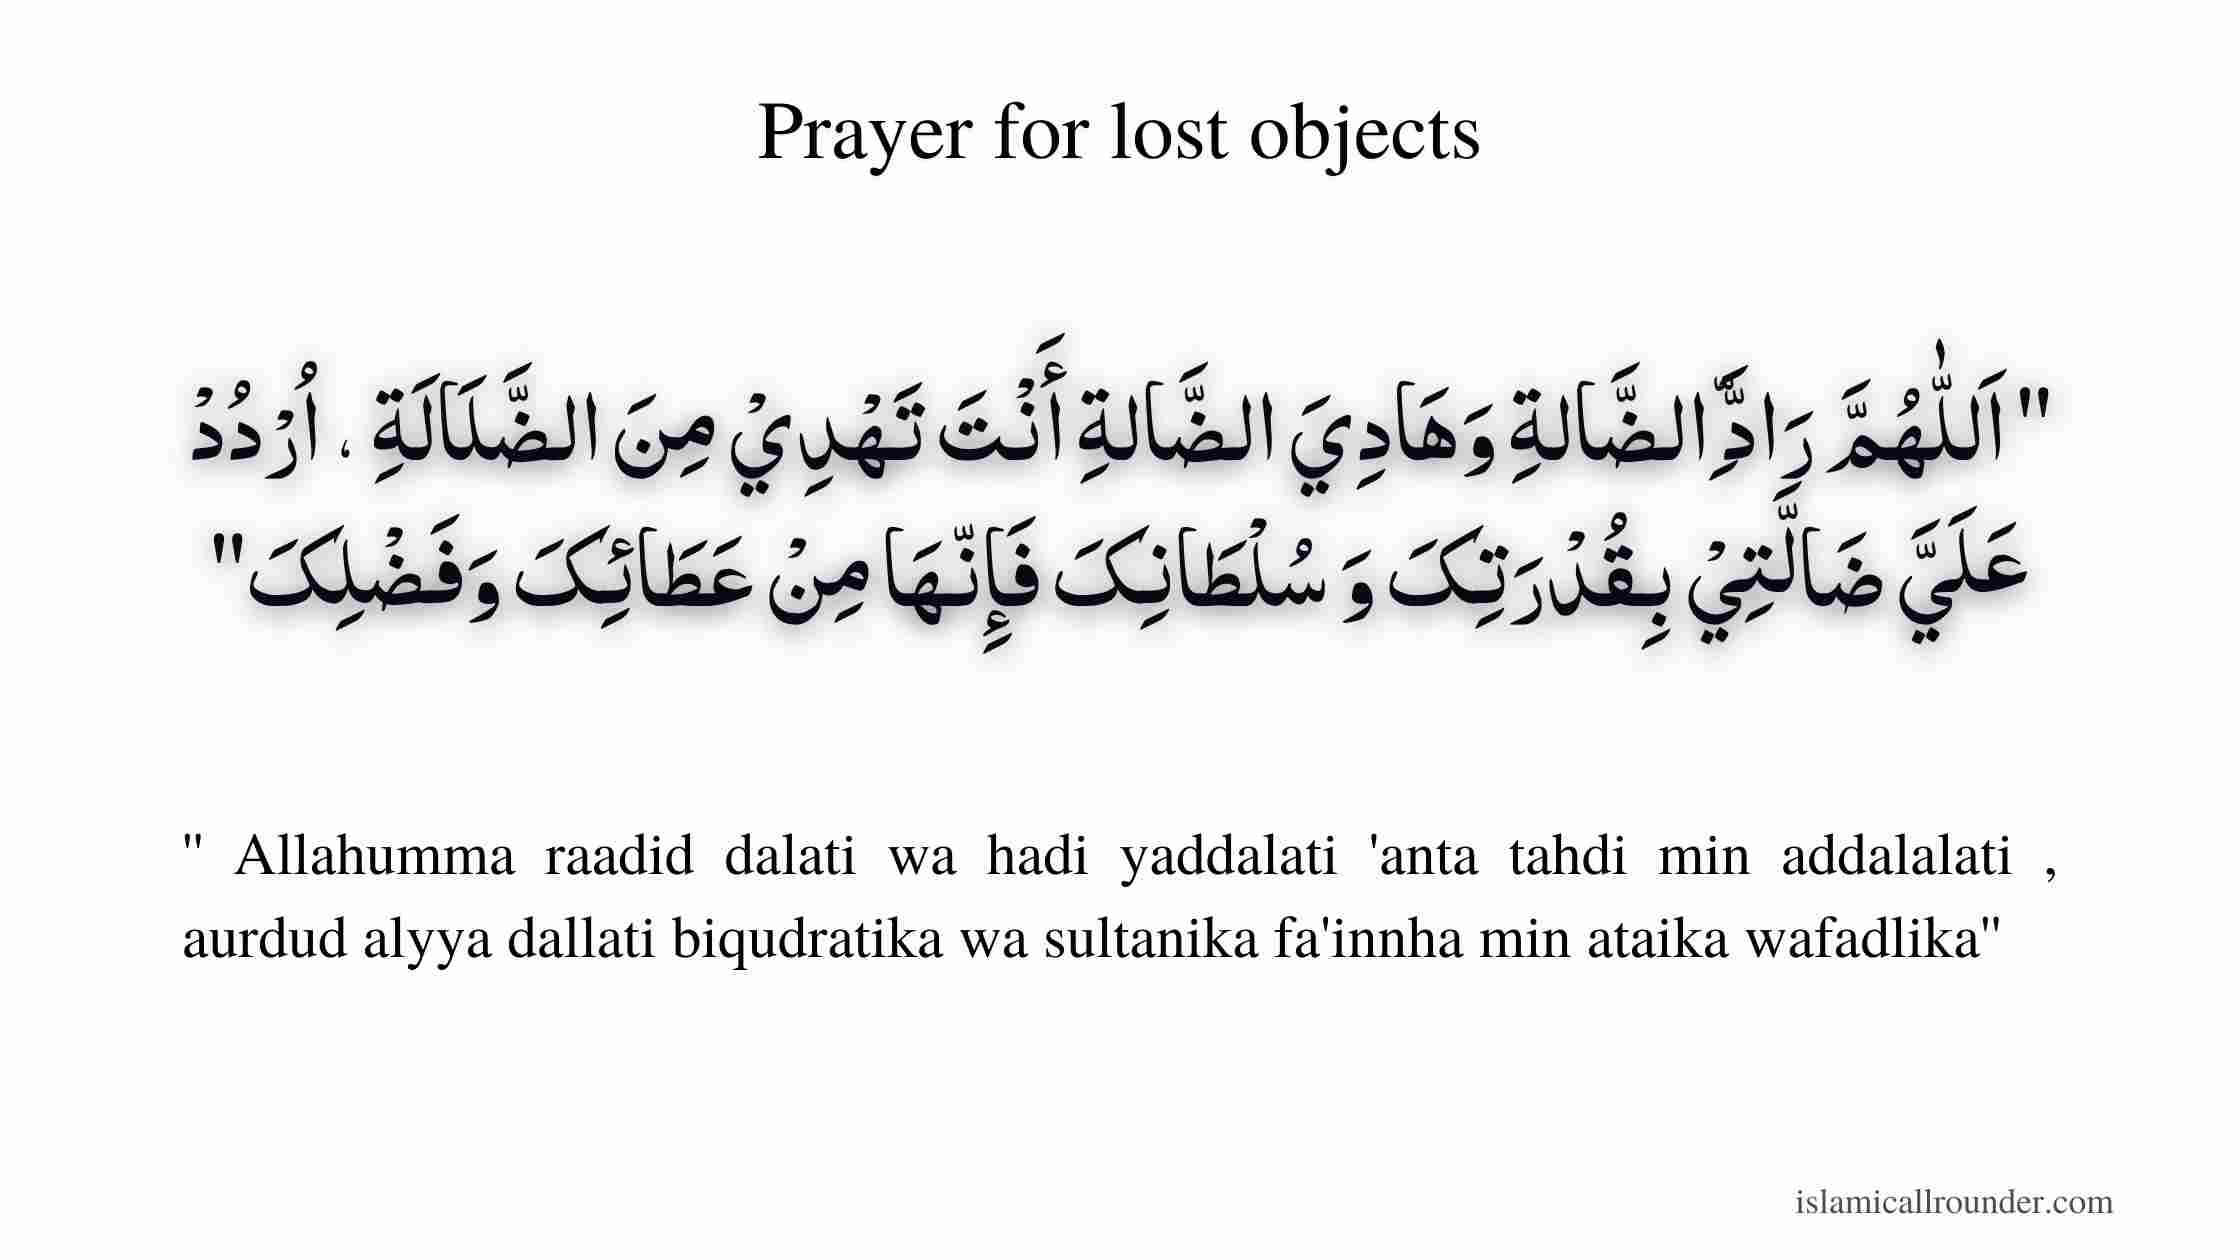 Prayer for lost objects